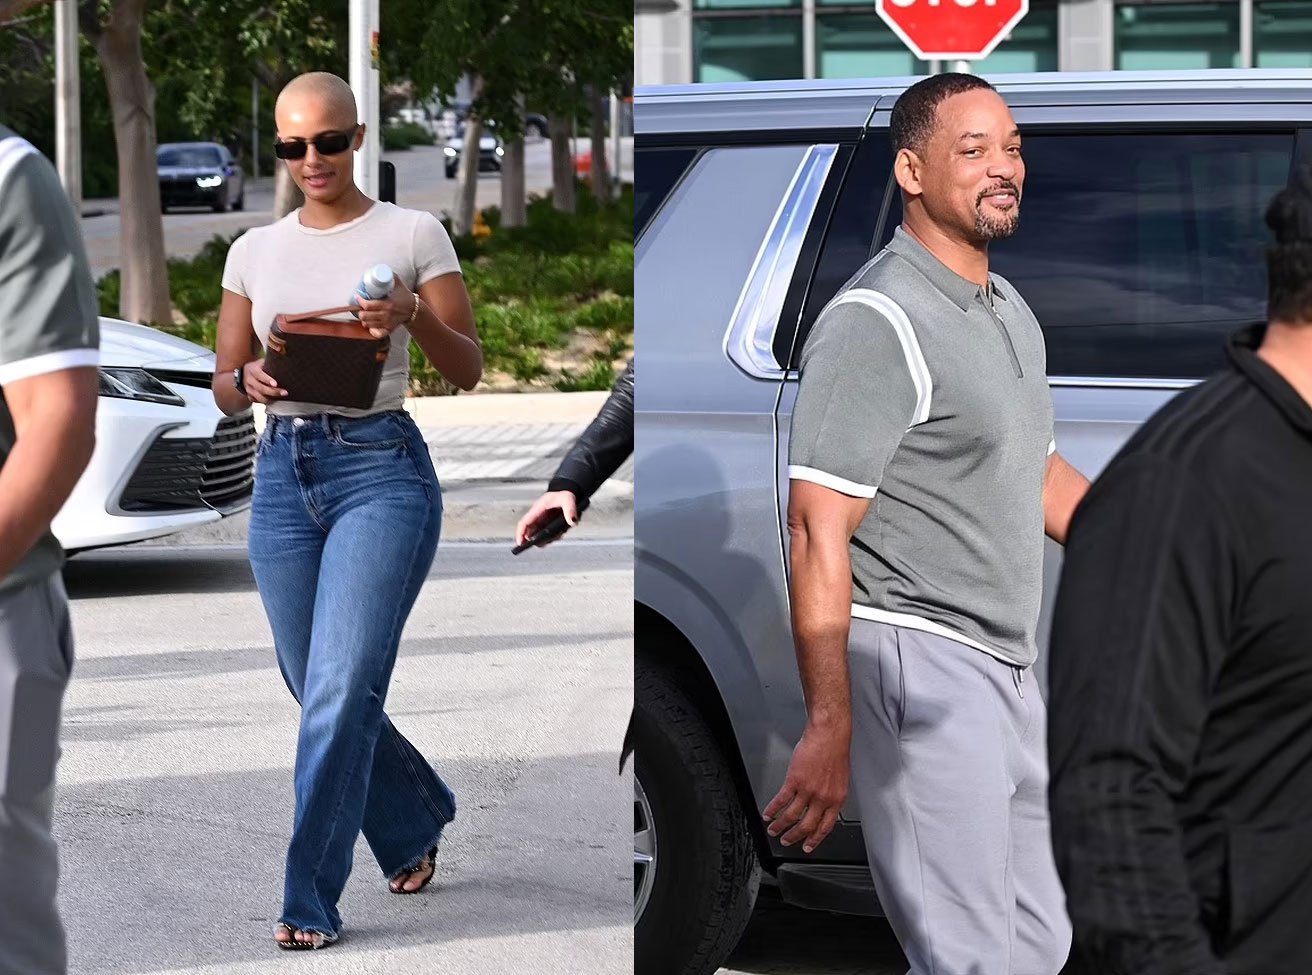 Will Smith and the mystery woman snapped strolling.